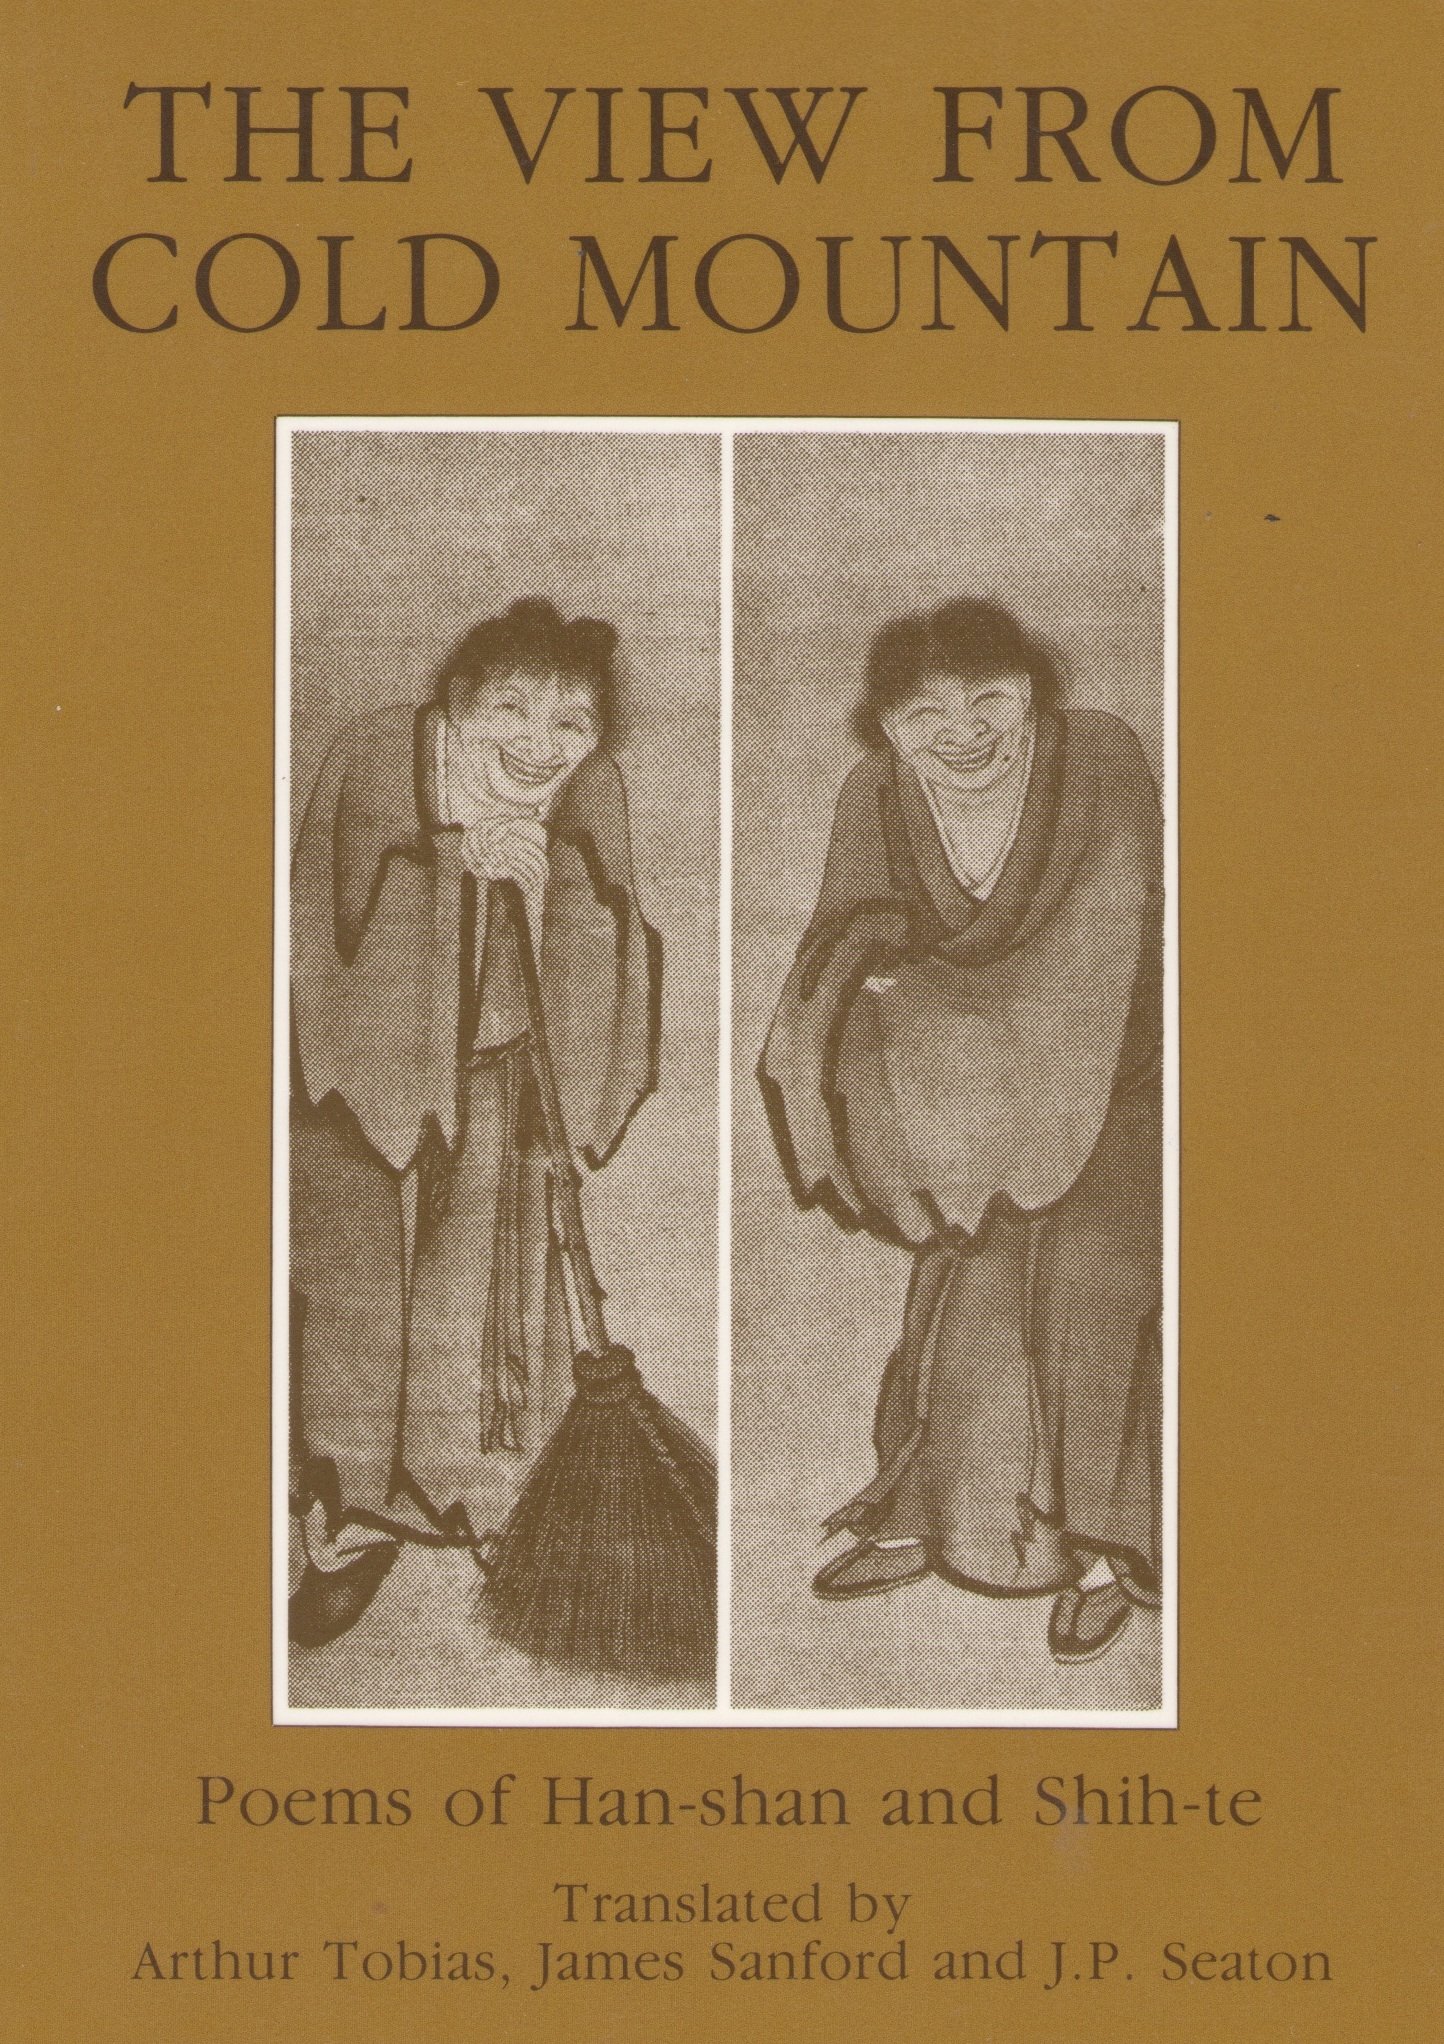 The view from Cold Mountain magazine reviews